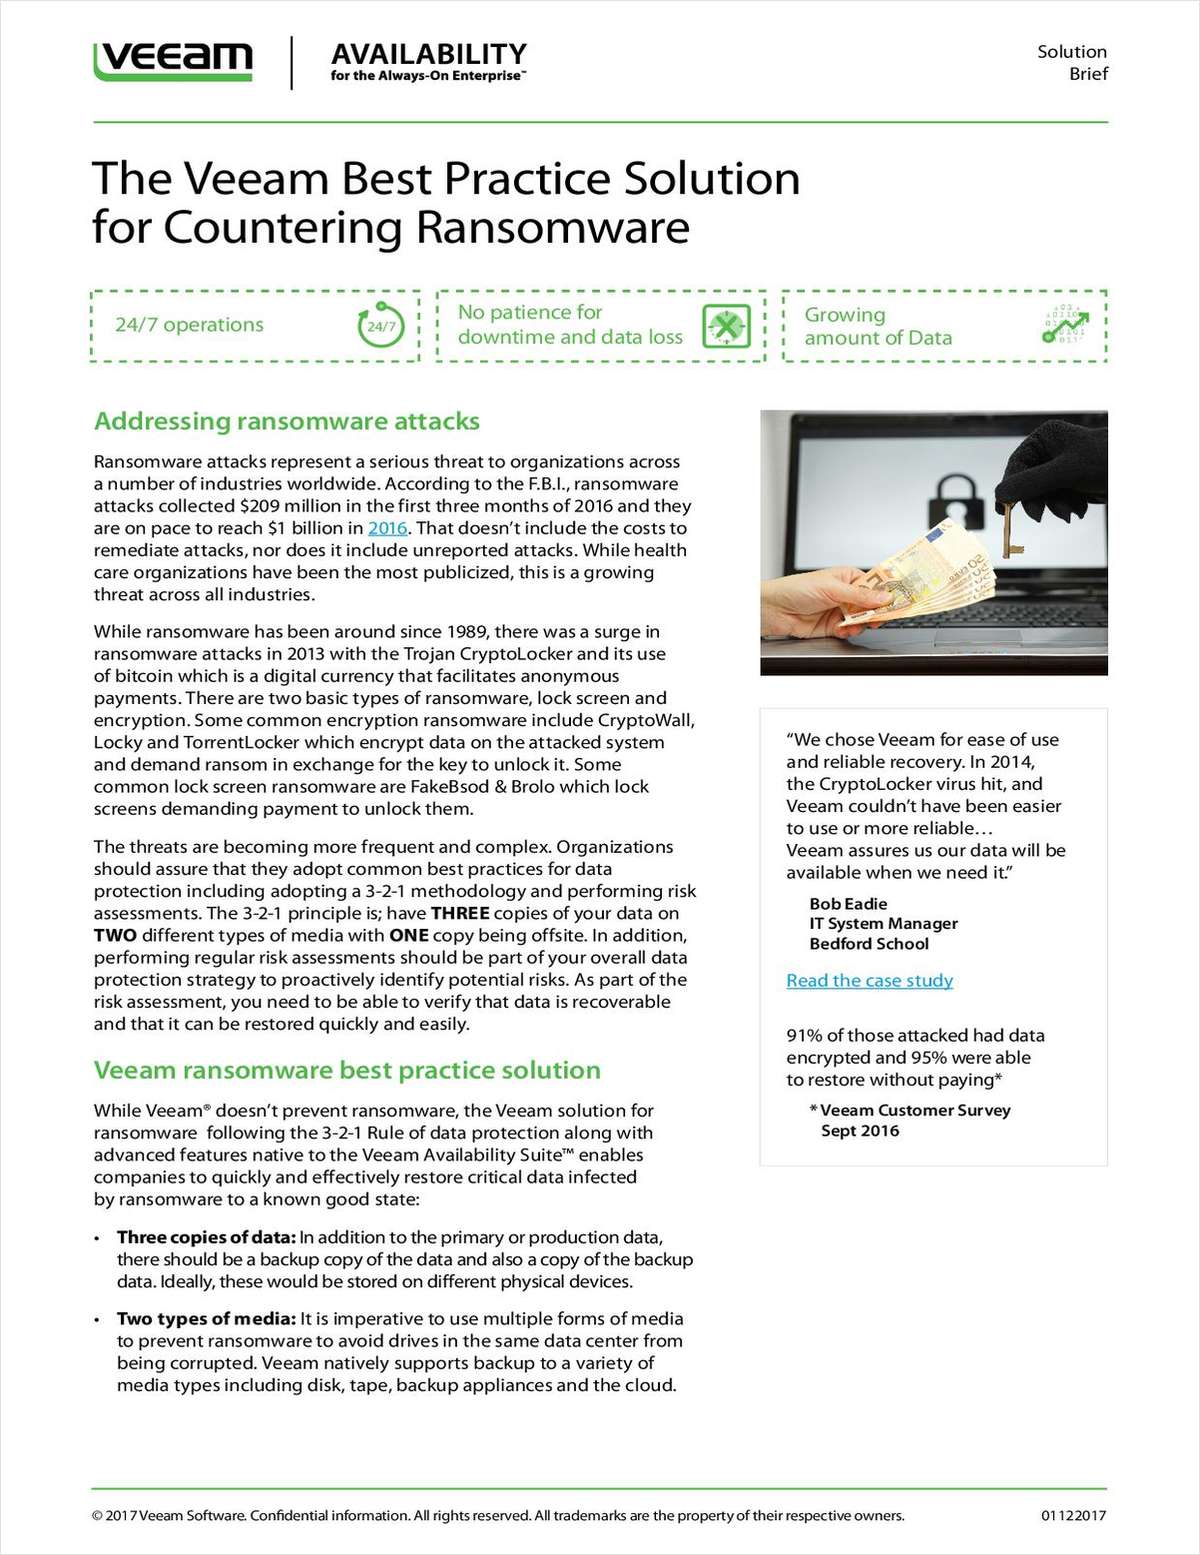 The Veeam Best Practice Solution for Countering Ransomware